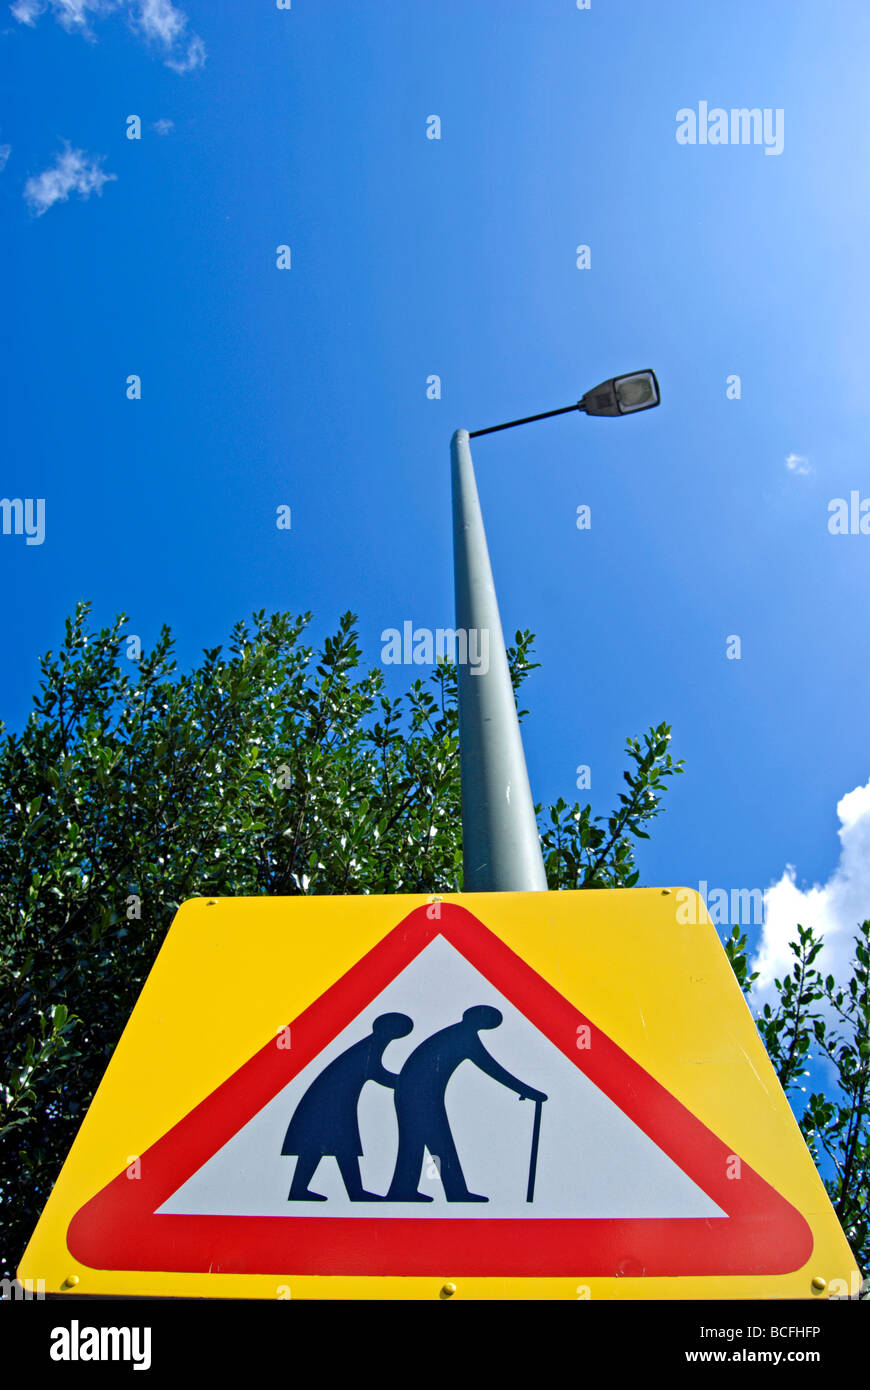 british road sign warning drivers that elderly people may be crossing the road Stock Photo